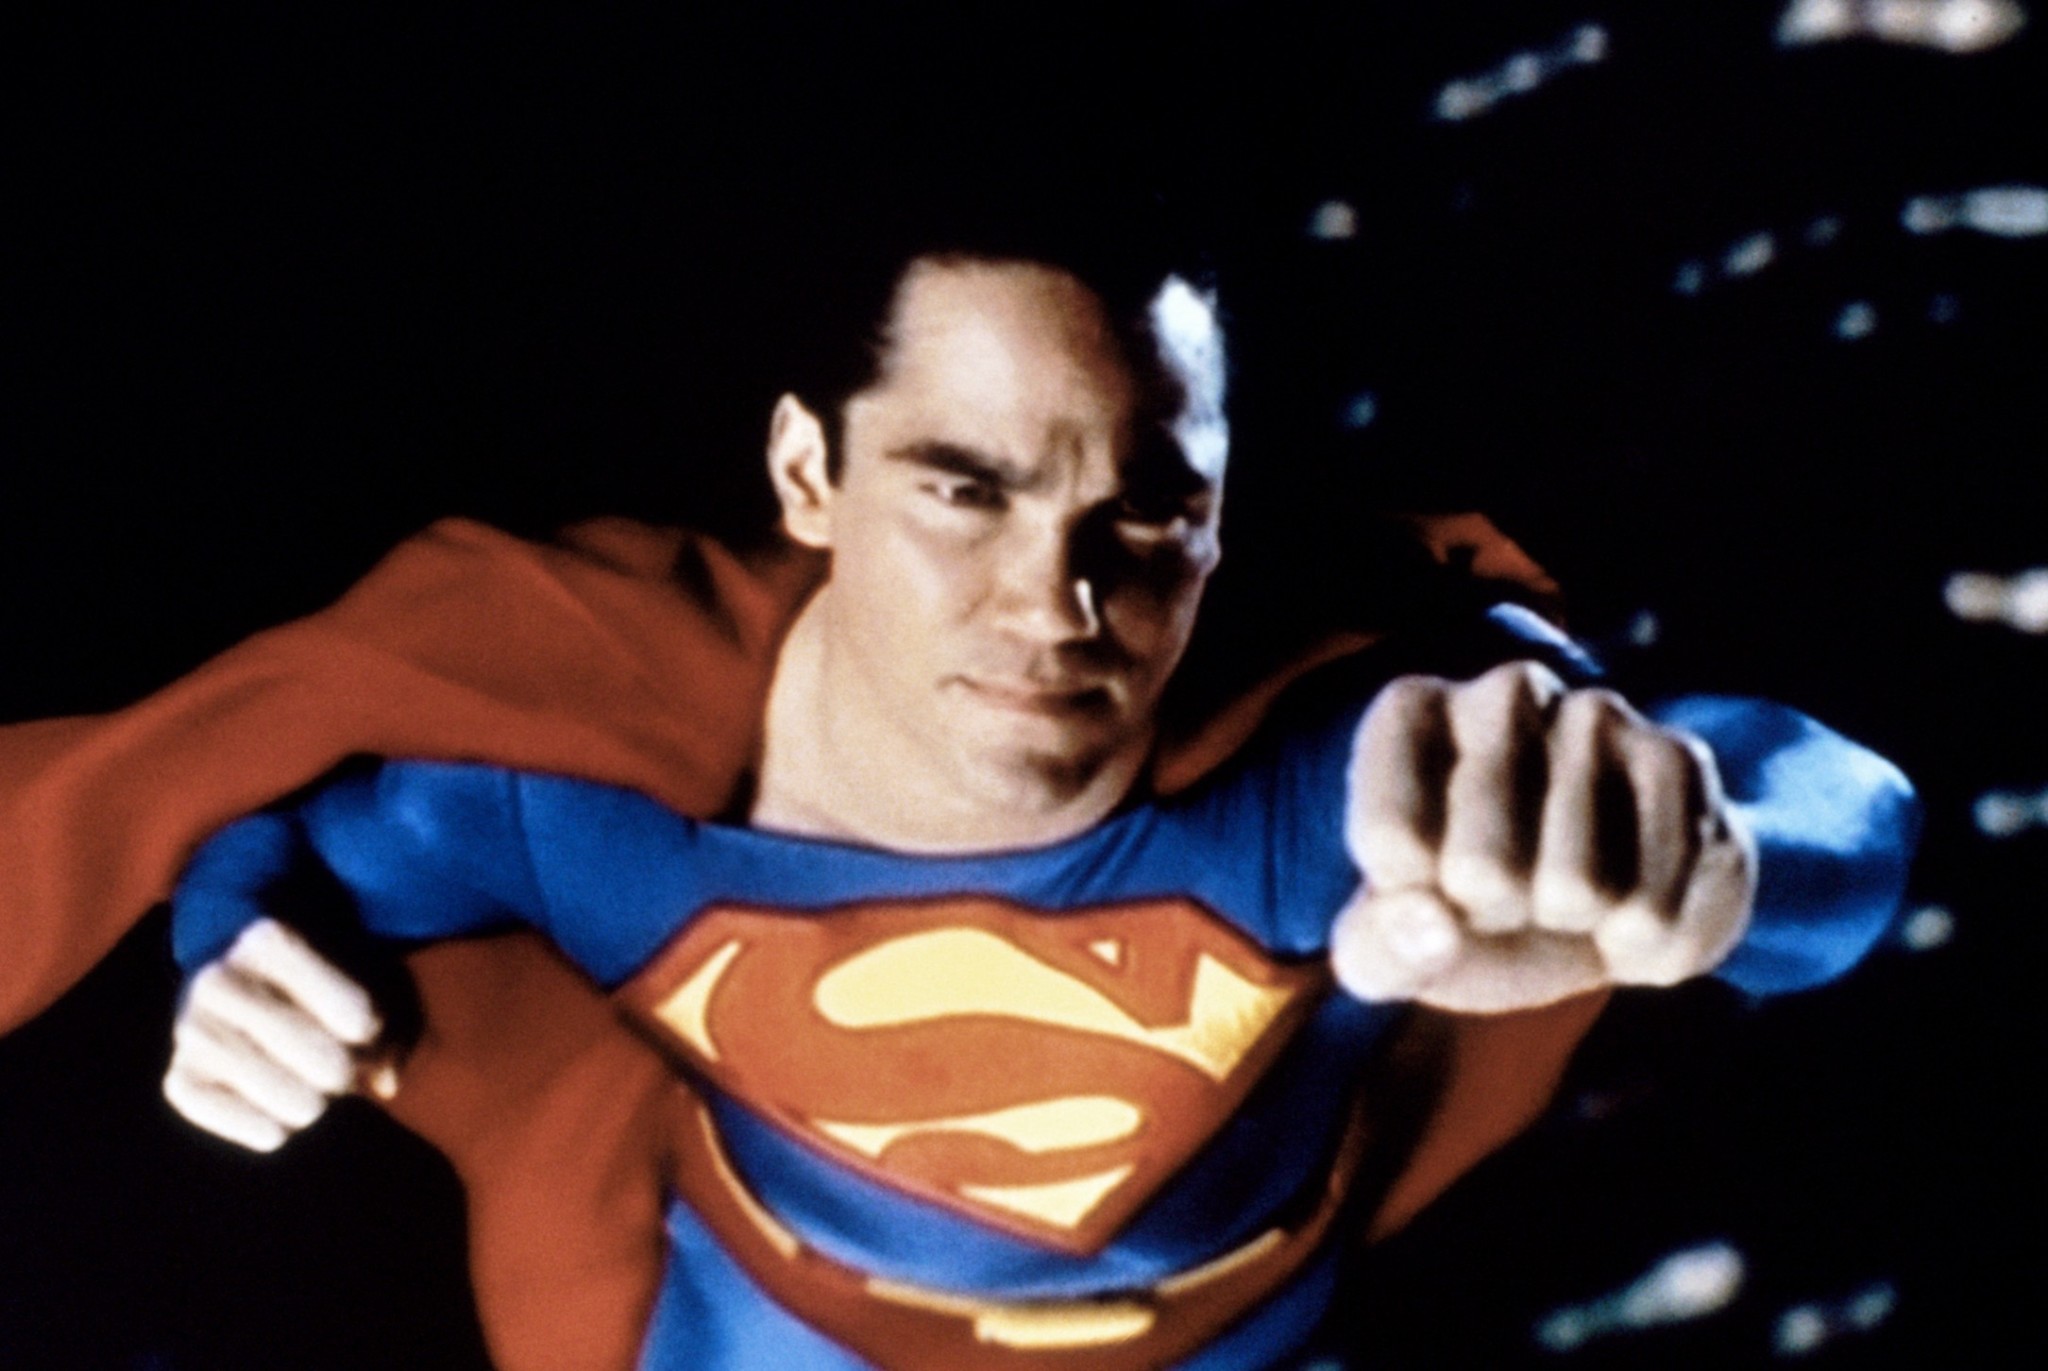 Dean Cain as Superman in Lois & Clark: The New Adventures of Superman